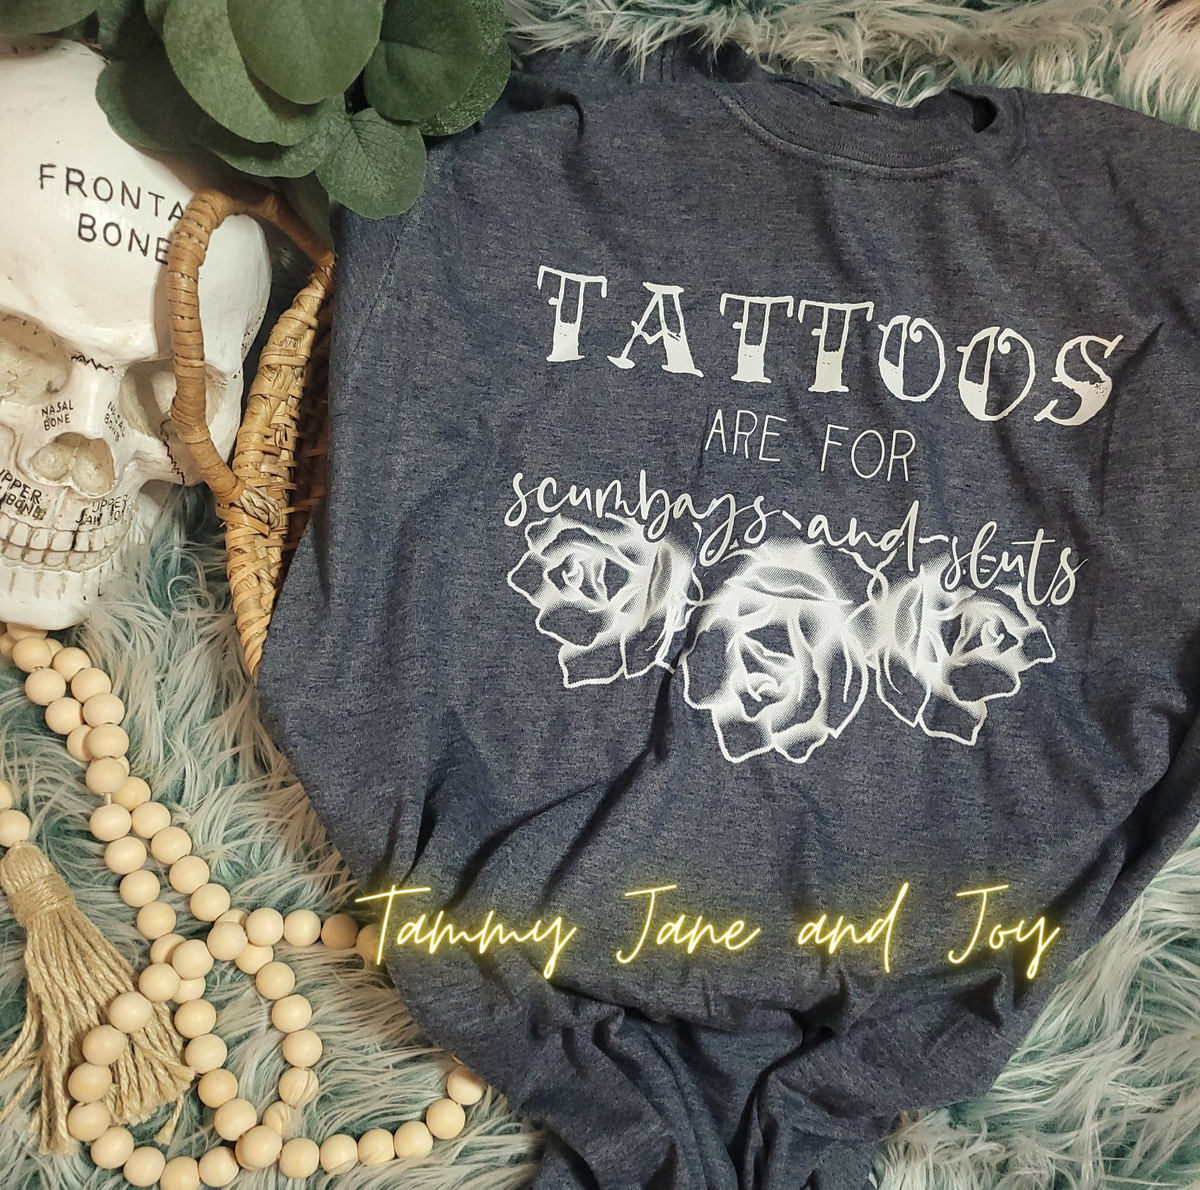 Tattoos are for scumbags and sluts – Tammy Jane and Joy Designs